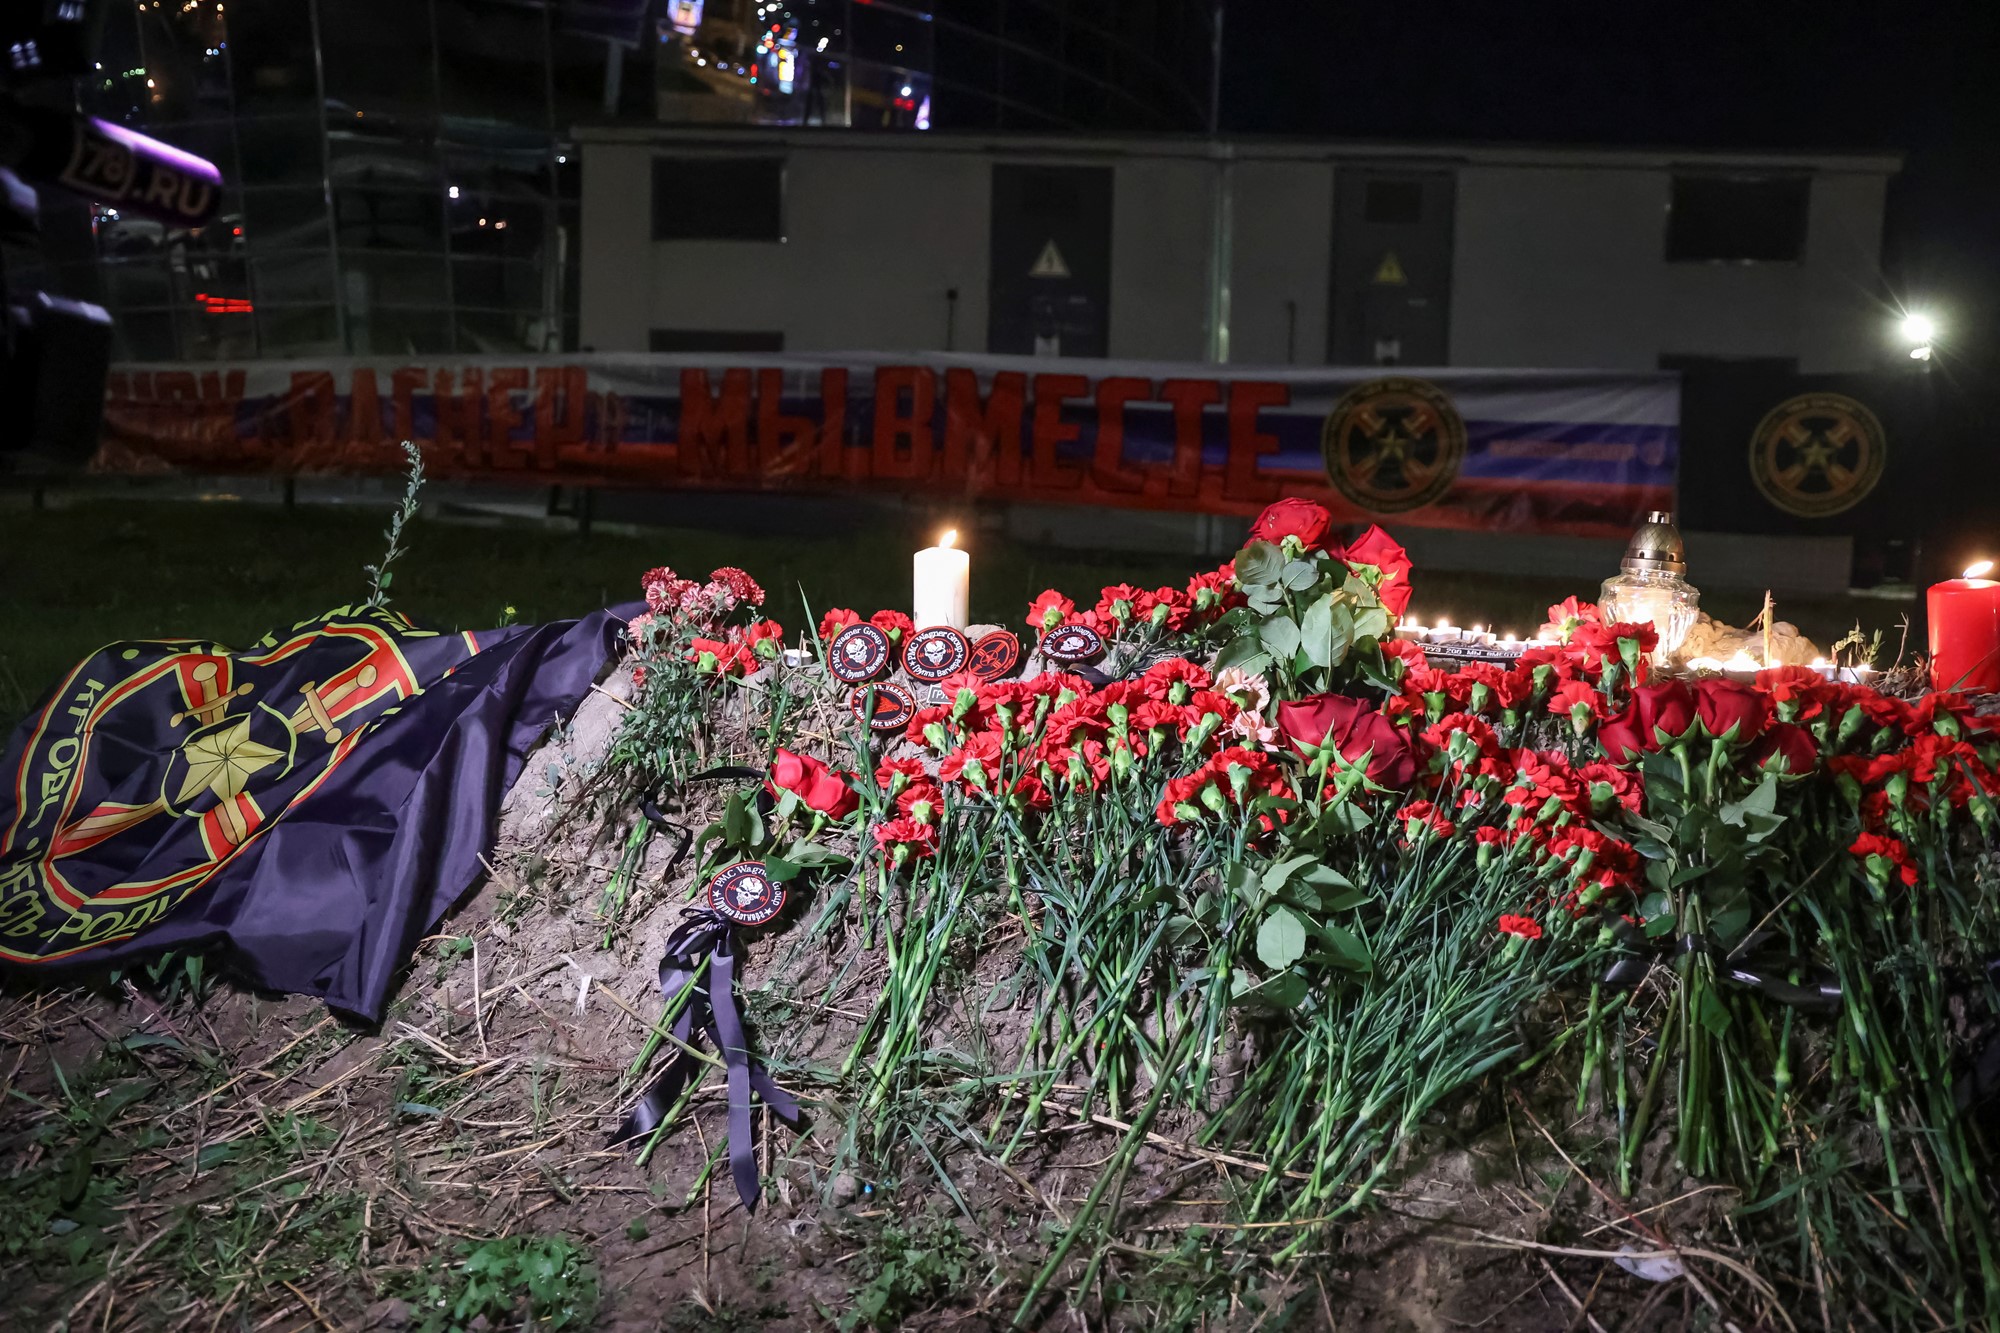 A pile of red roses, with flowers and a black flag depicting the Wagner crest